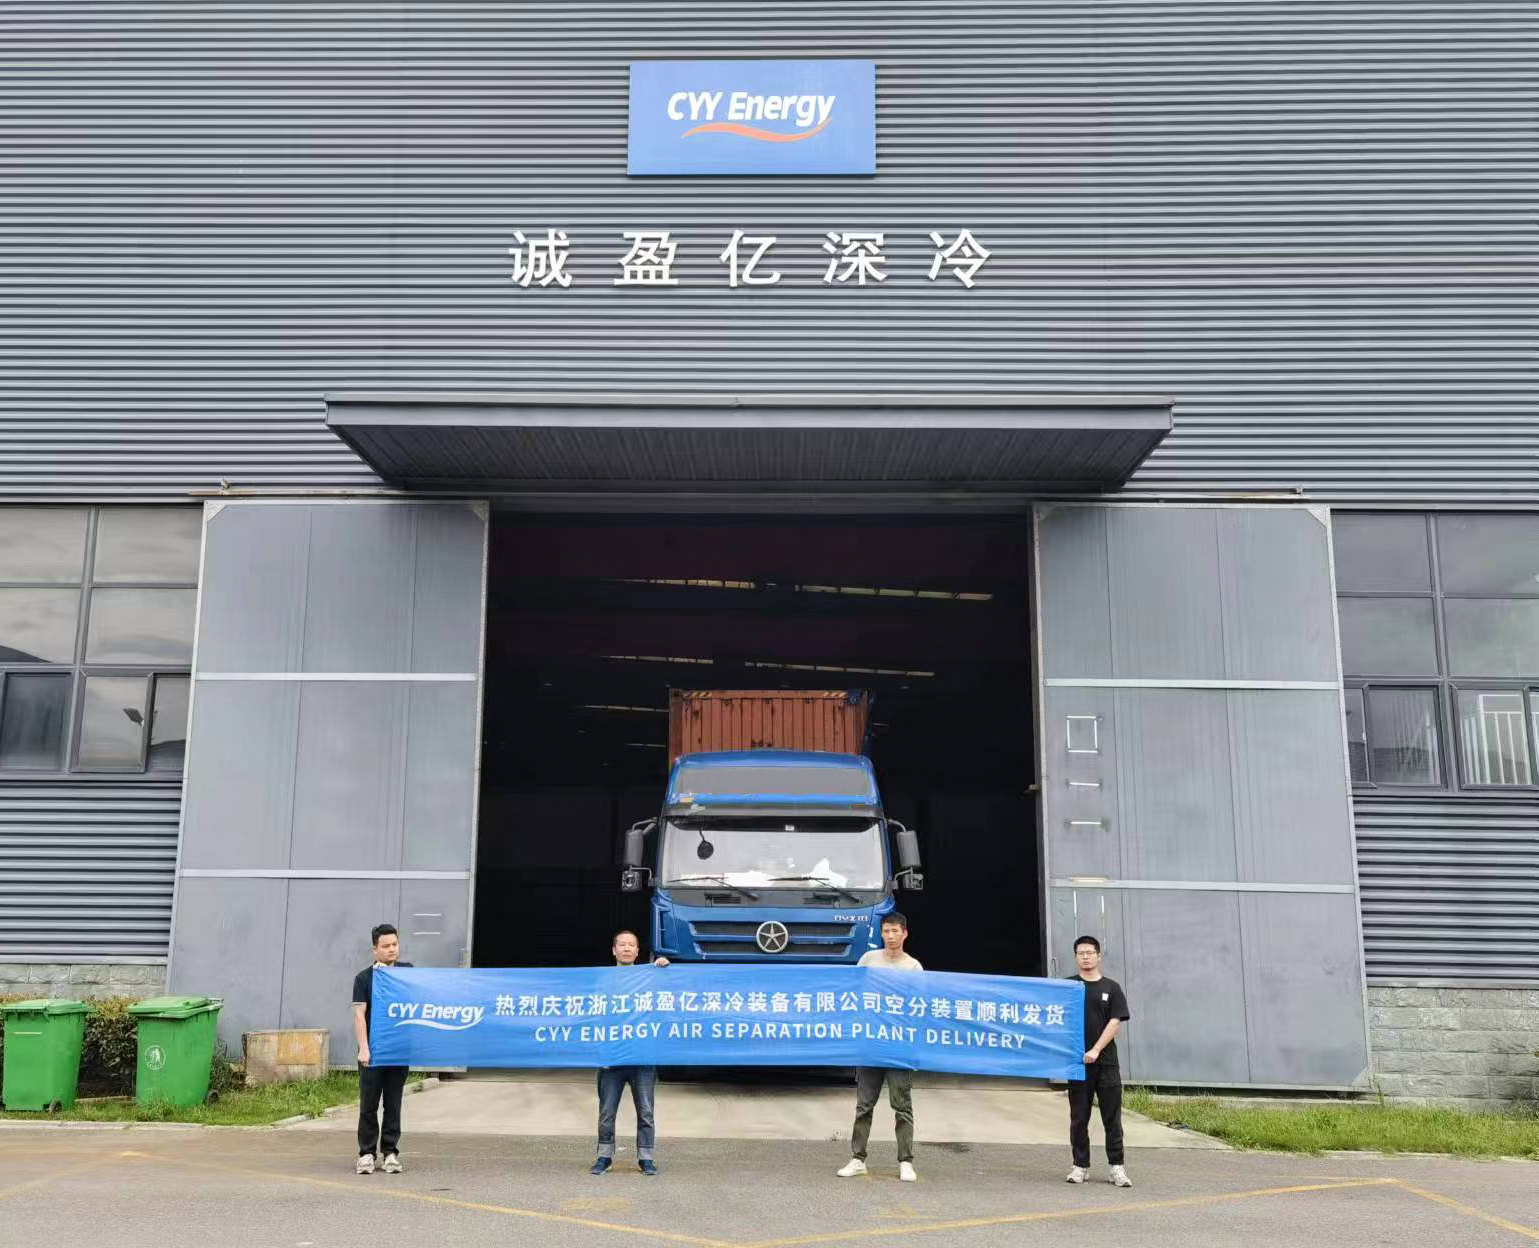 CYY Energy 15TPD Air Separation Plant Delivery